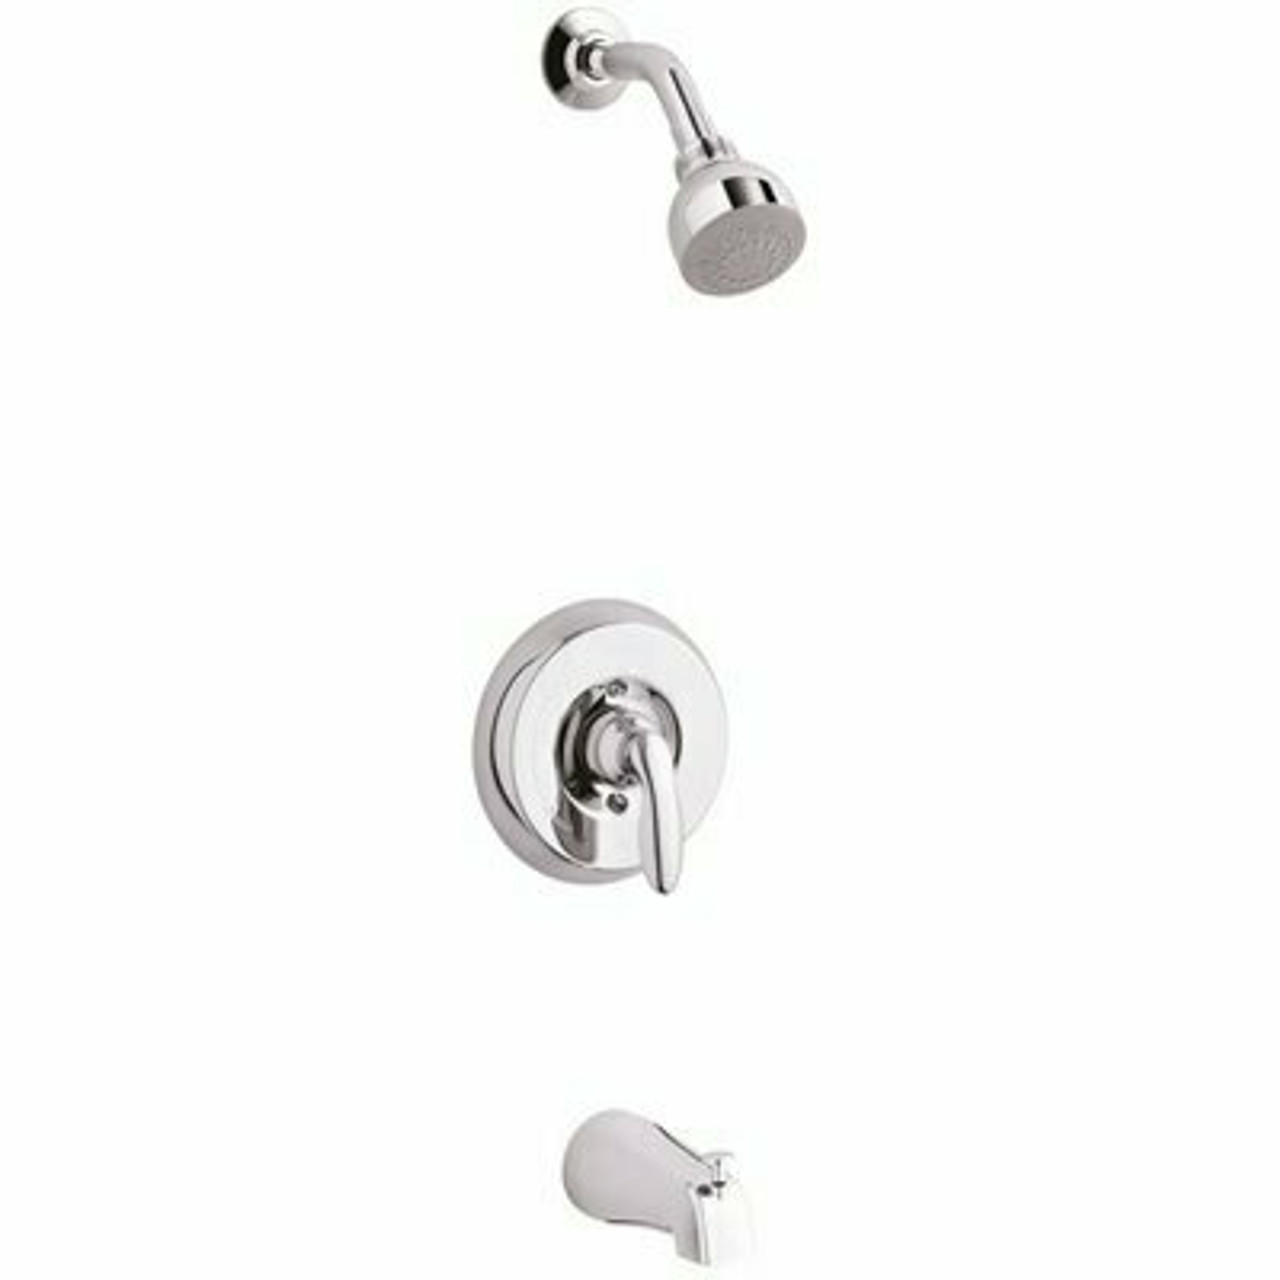 Kohler Coralais 1-Handle 1-Spray Tub And Shower Faucet With Lever Handle And Slipfit Spout In Polished Chrome